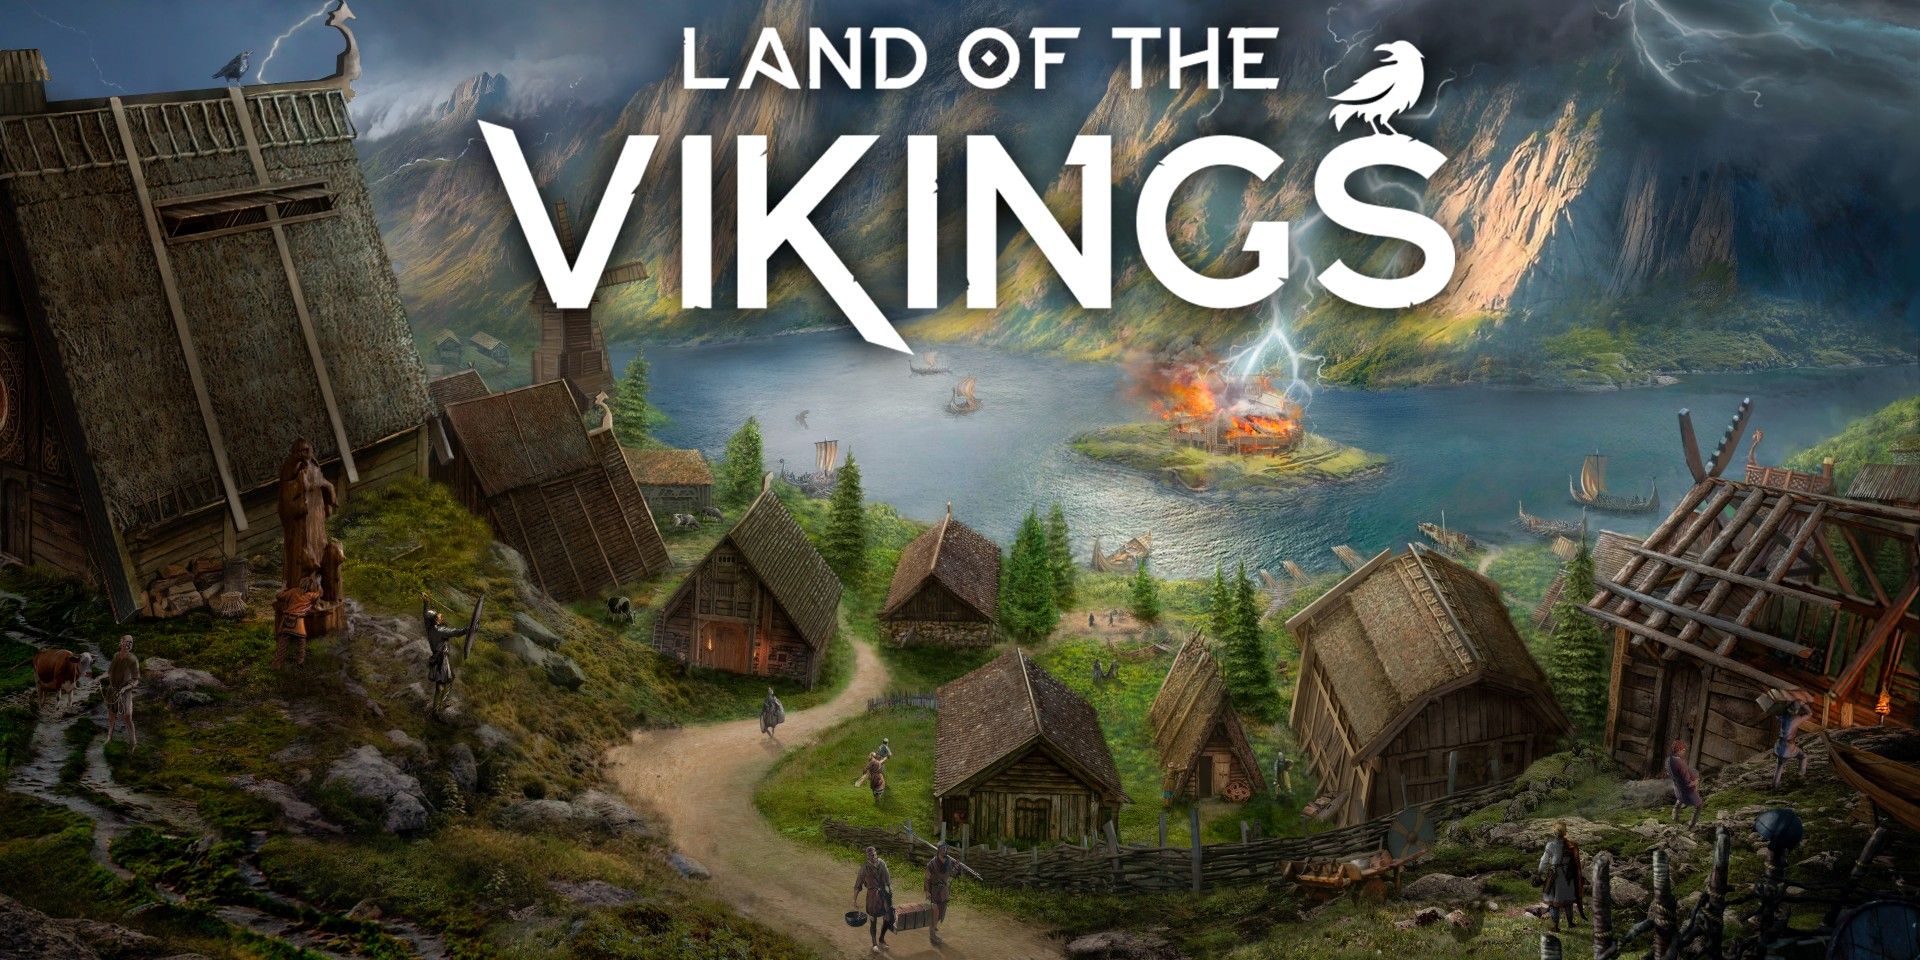 Land of the Vikings Key Art showing the game's title, a rustic village, and mountains in the background.